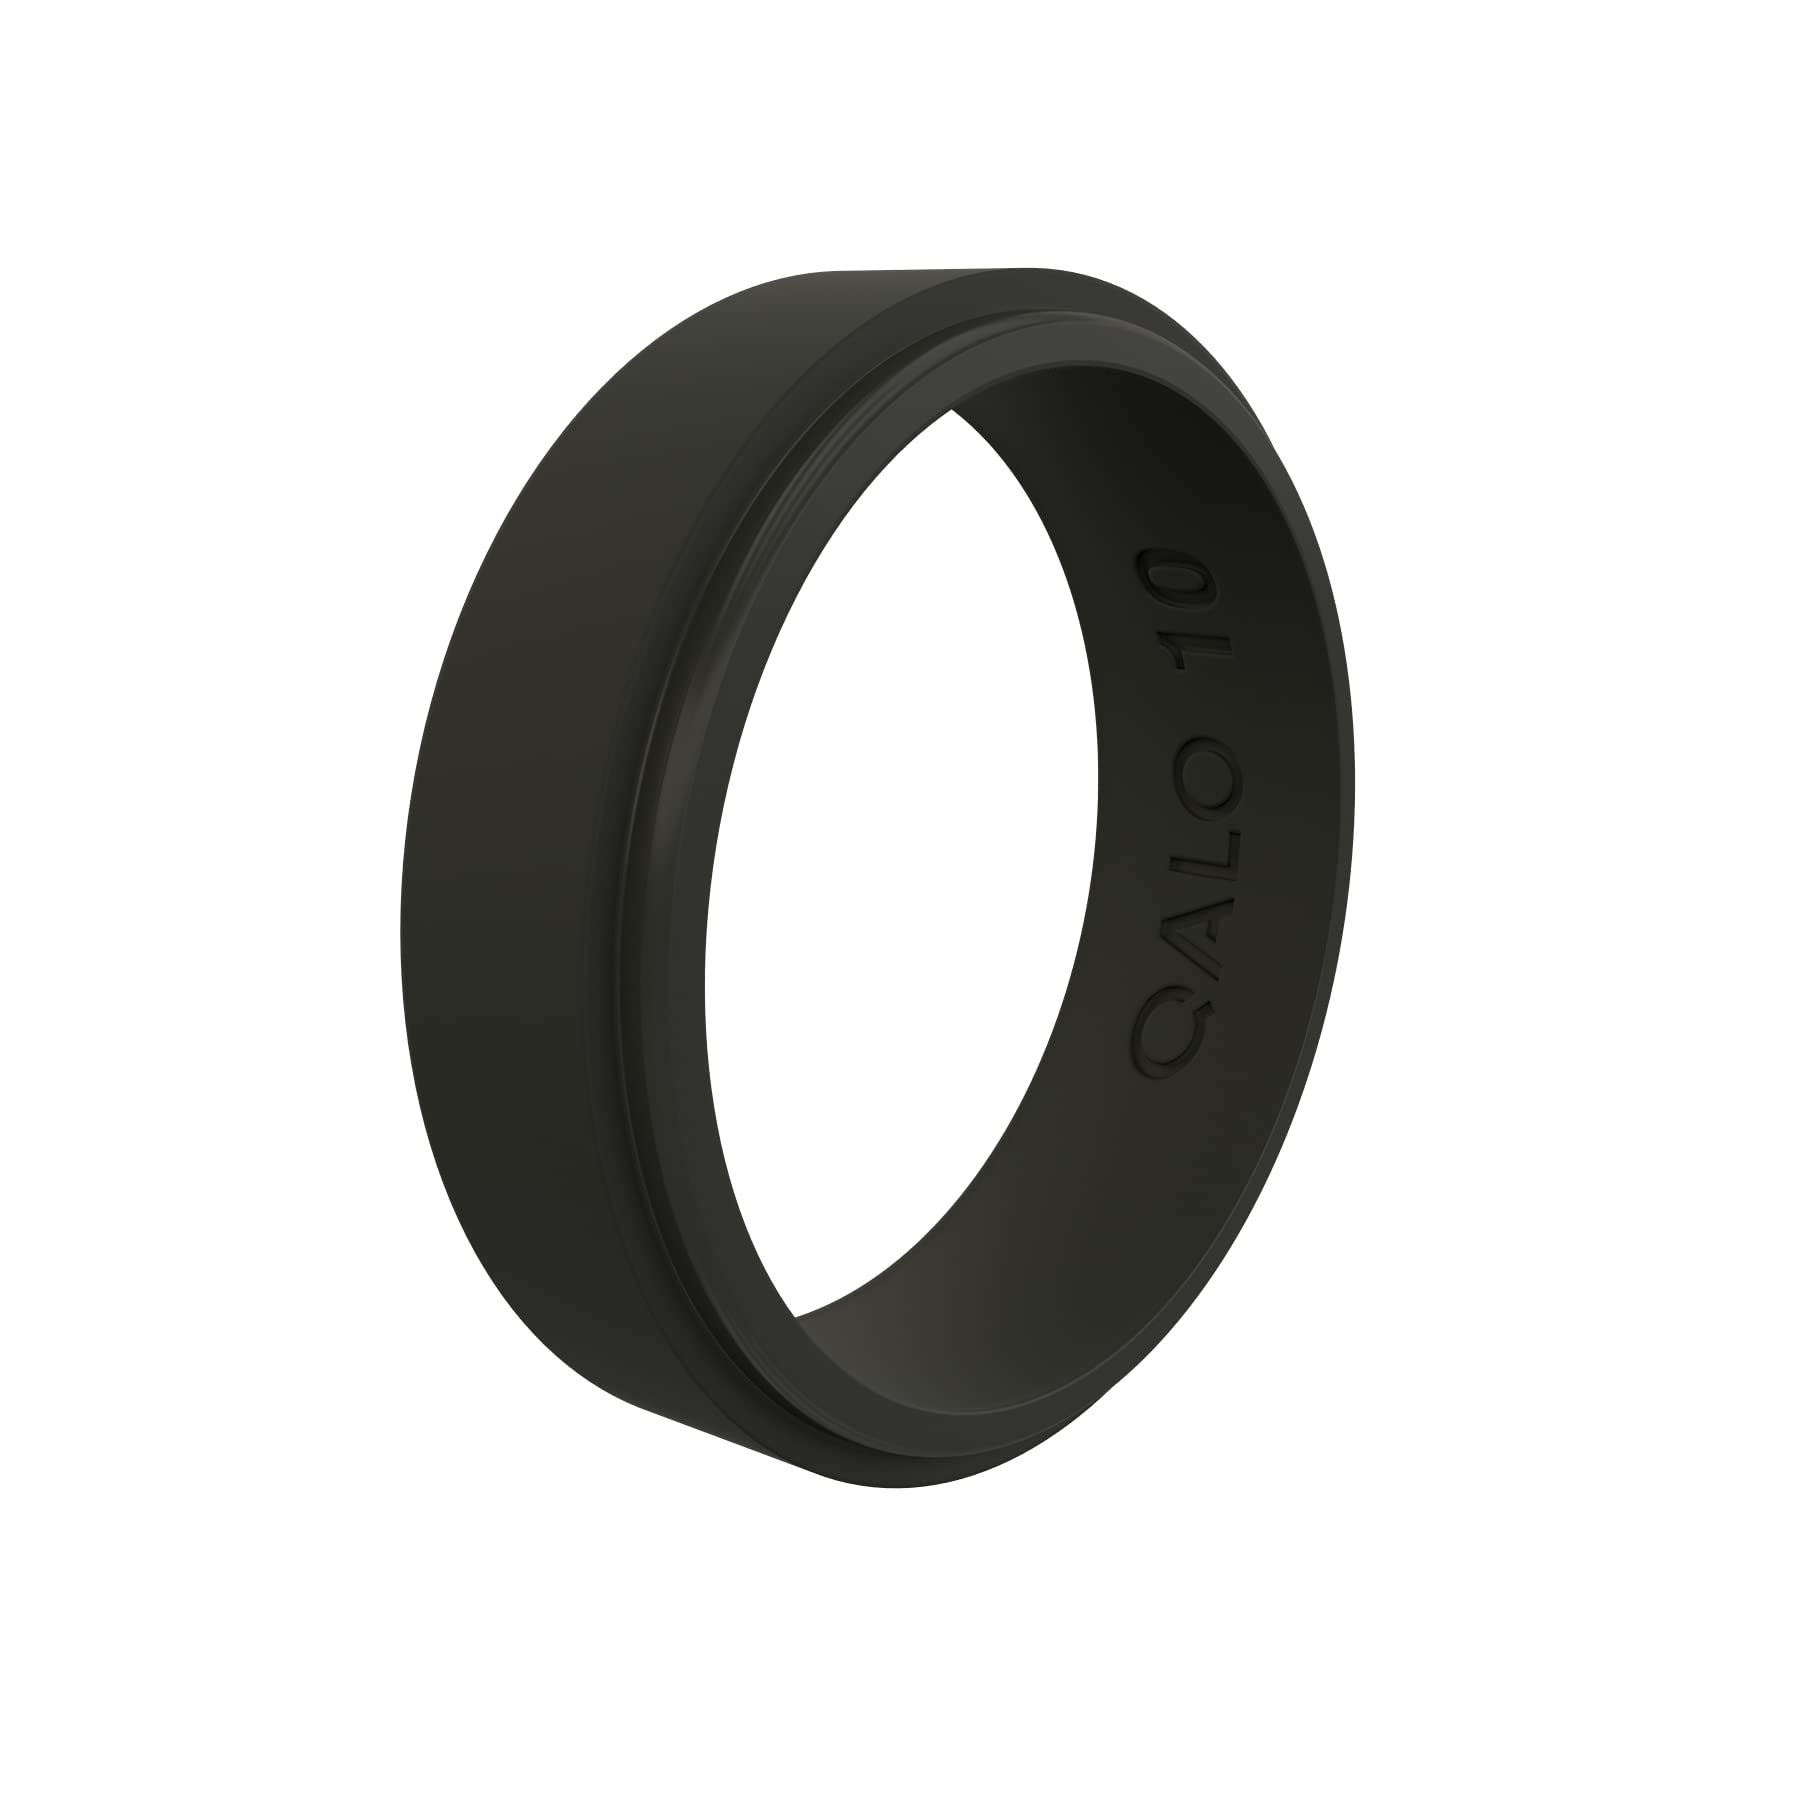 QALO Men & Women's Rubber Silicone Ring, Narrow Polished Step Edge Rubber Wedding Band, Breathable, Durable Unisex Engagement Silicone Ring, Multi Colors